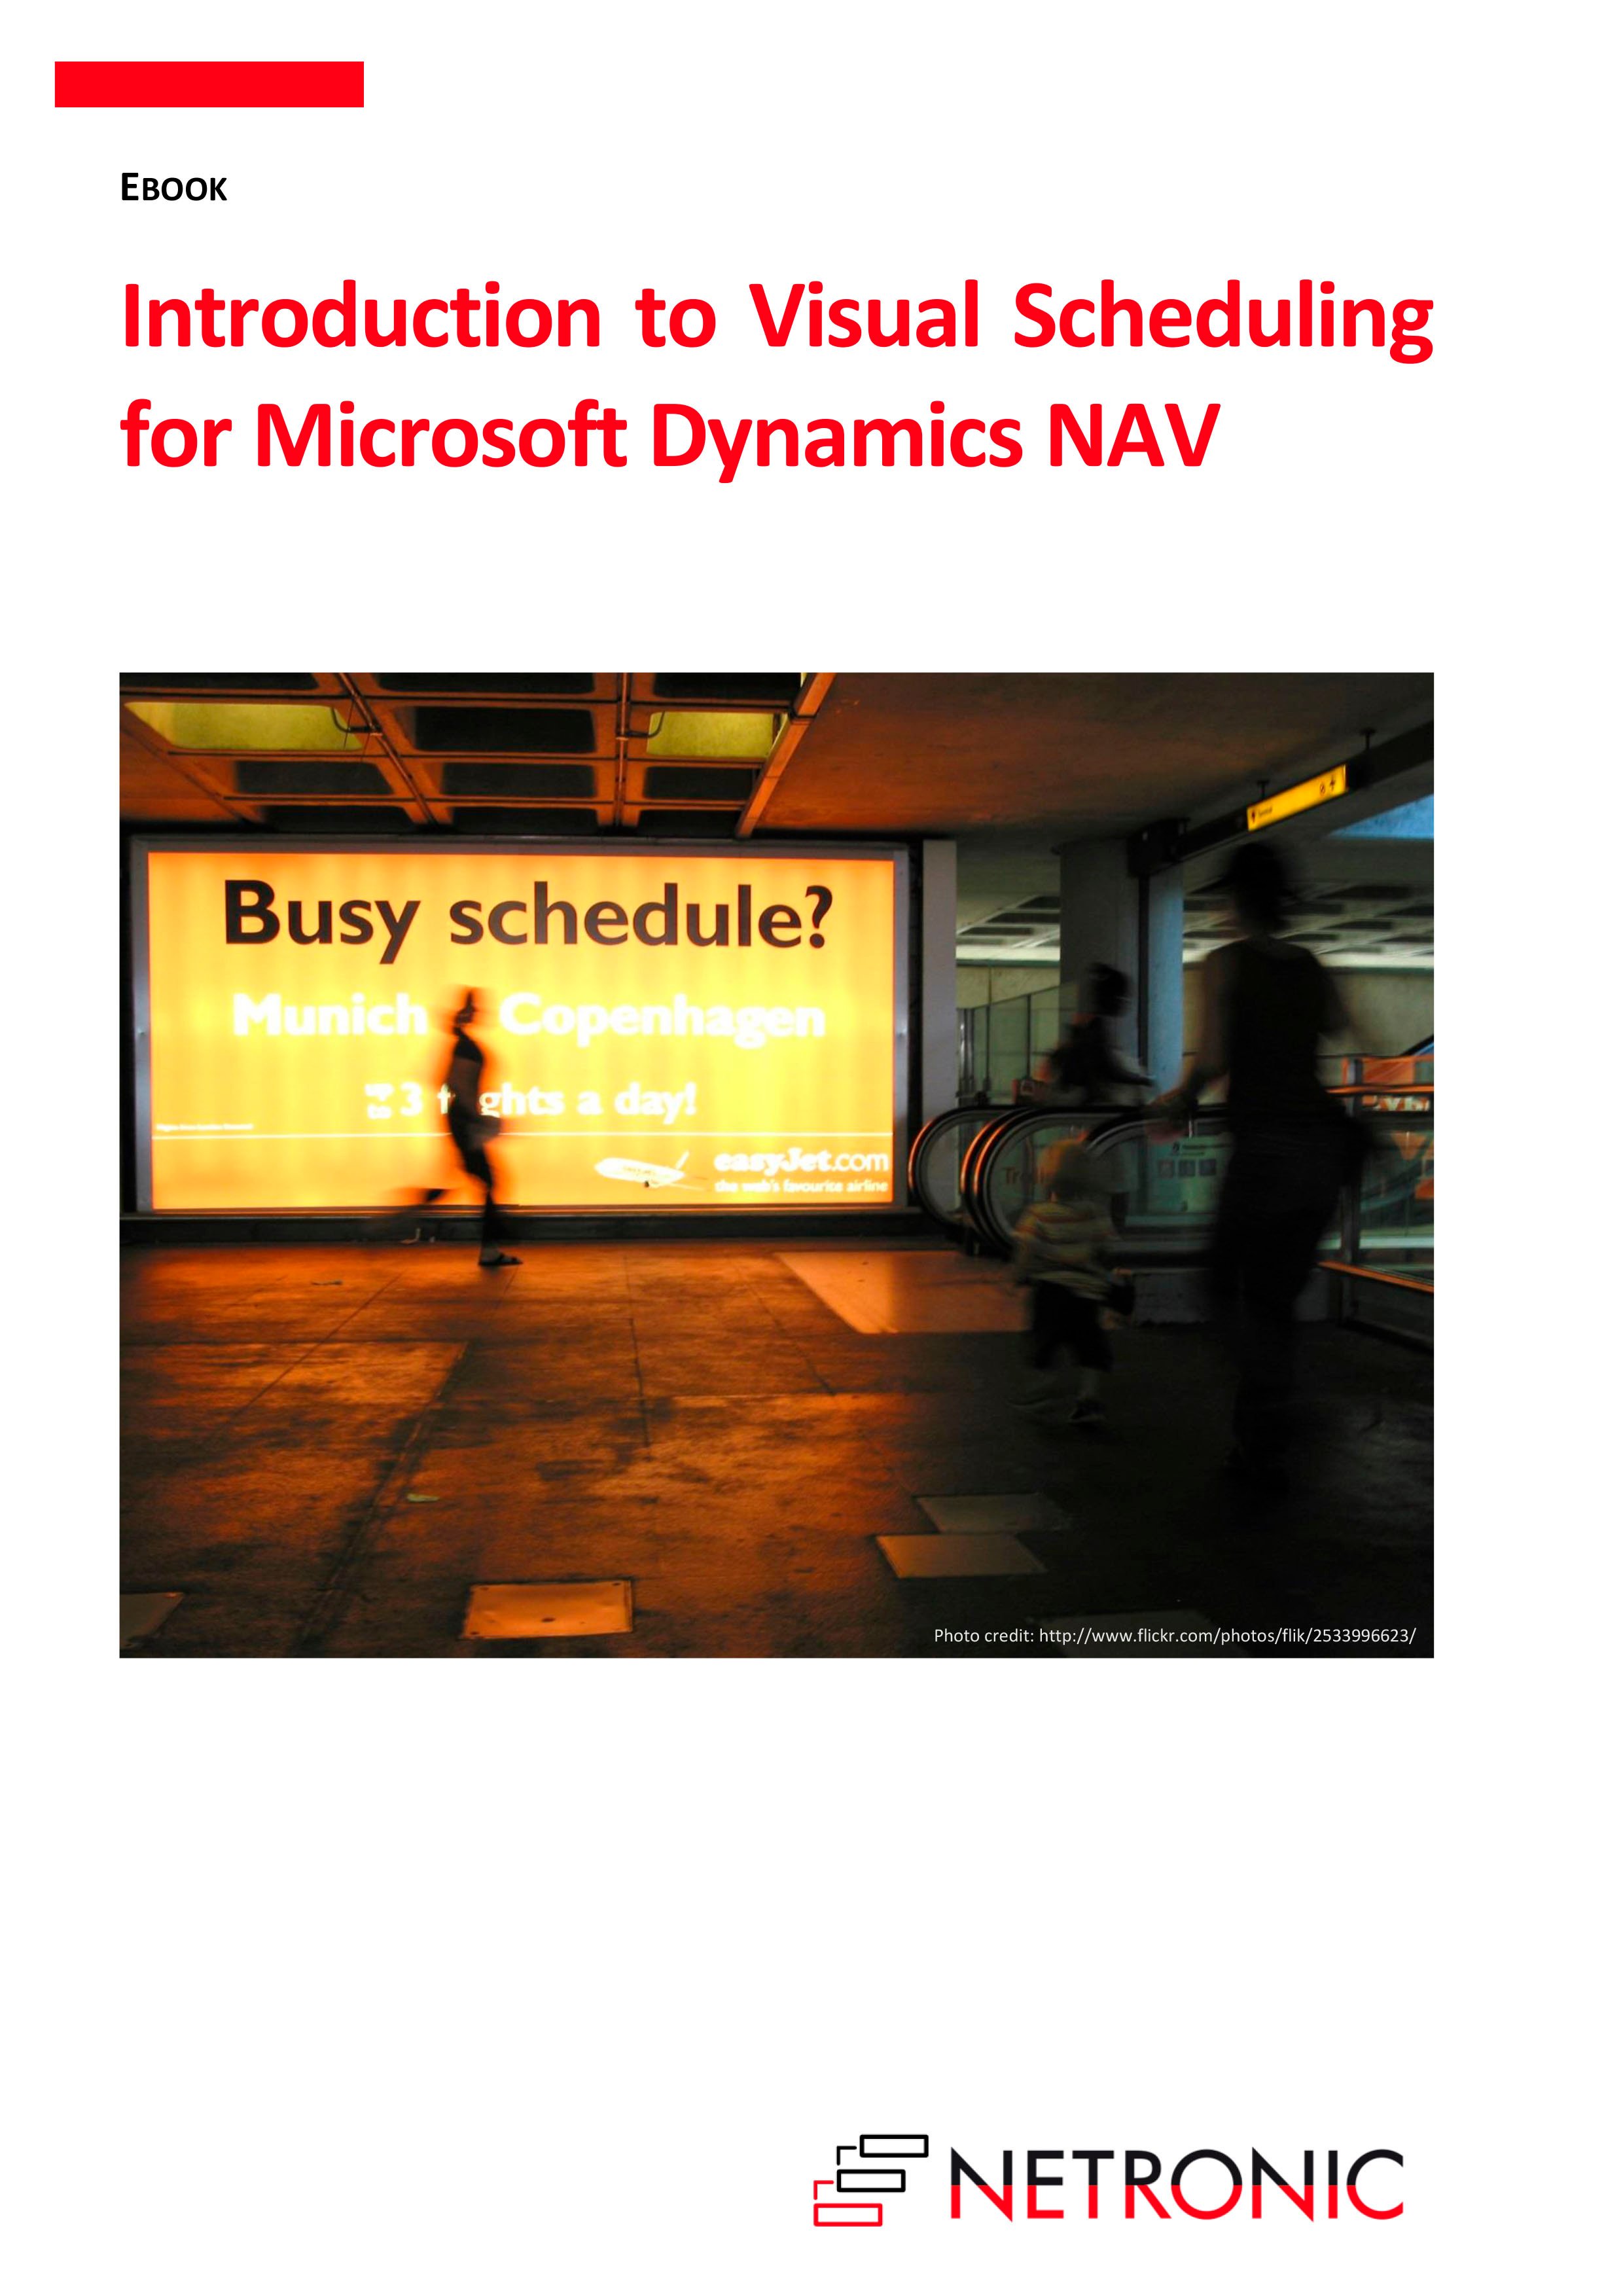 Introduction to Visual Scheduling for Dynamics NAV